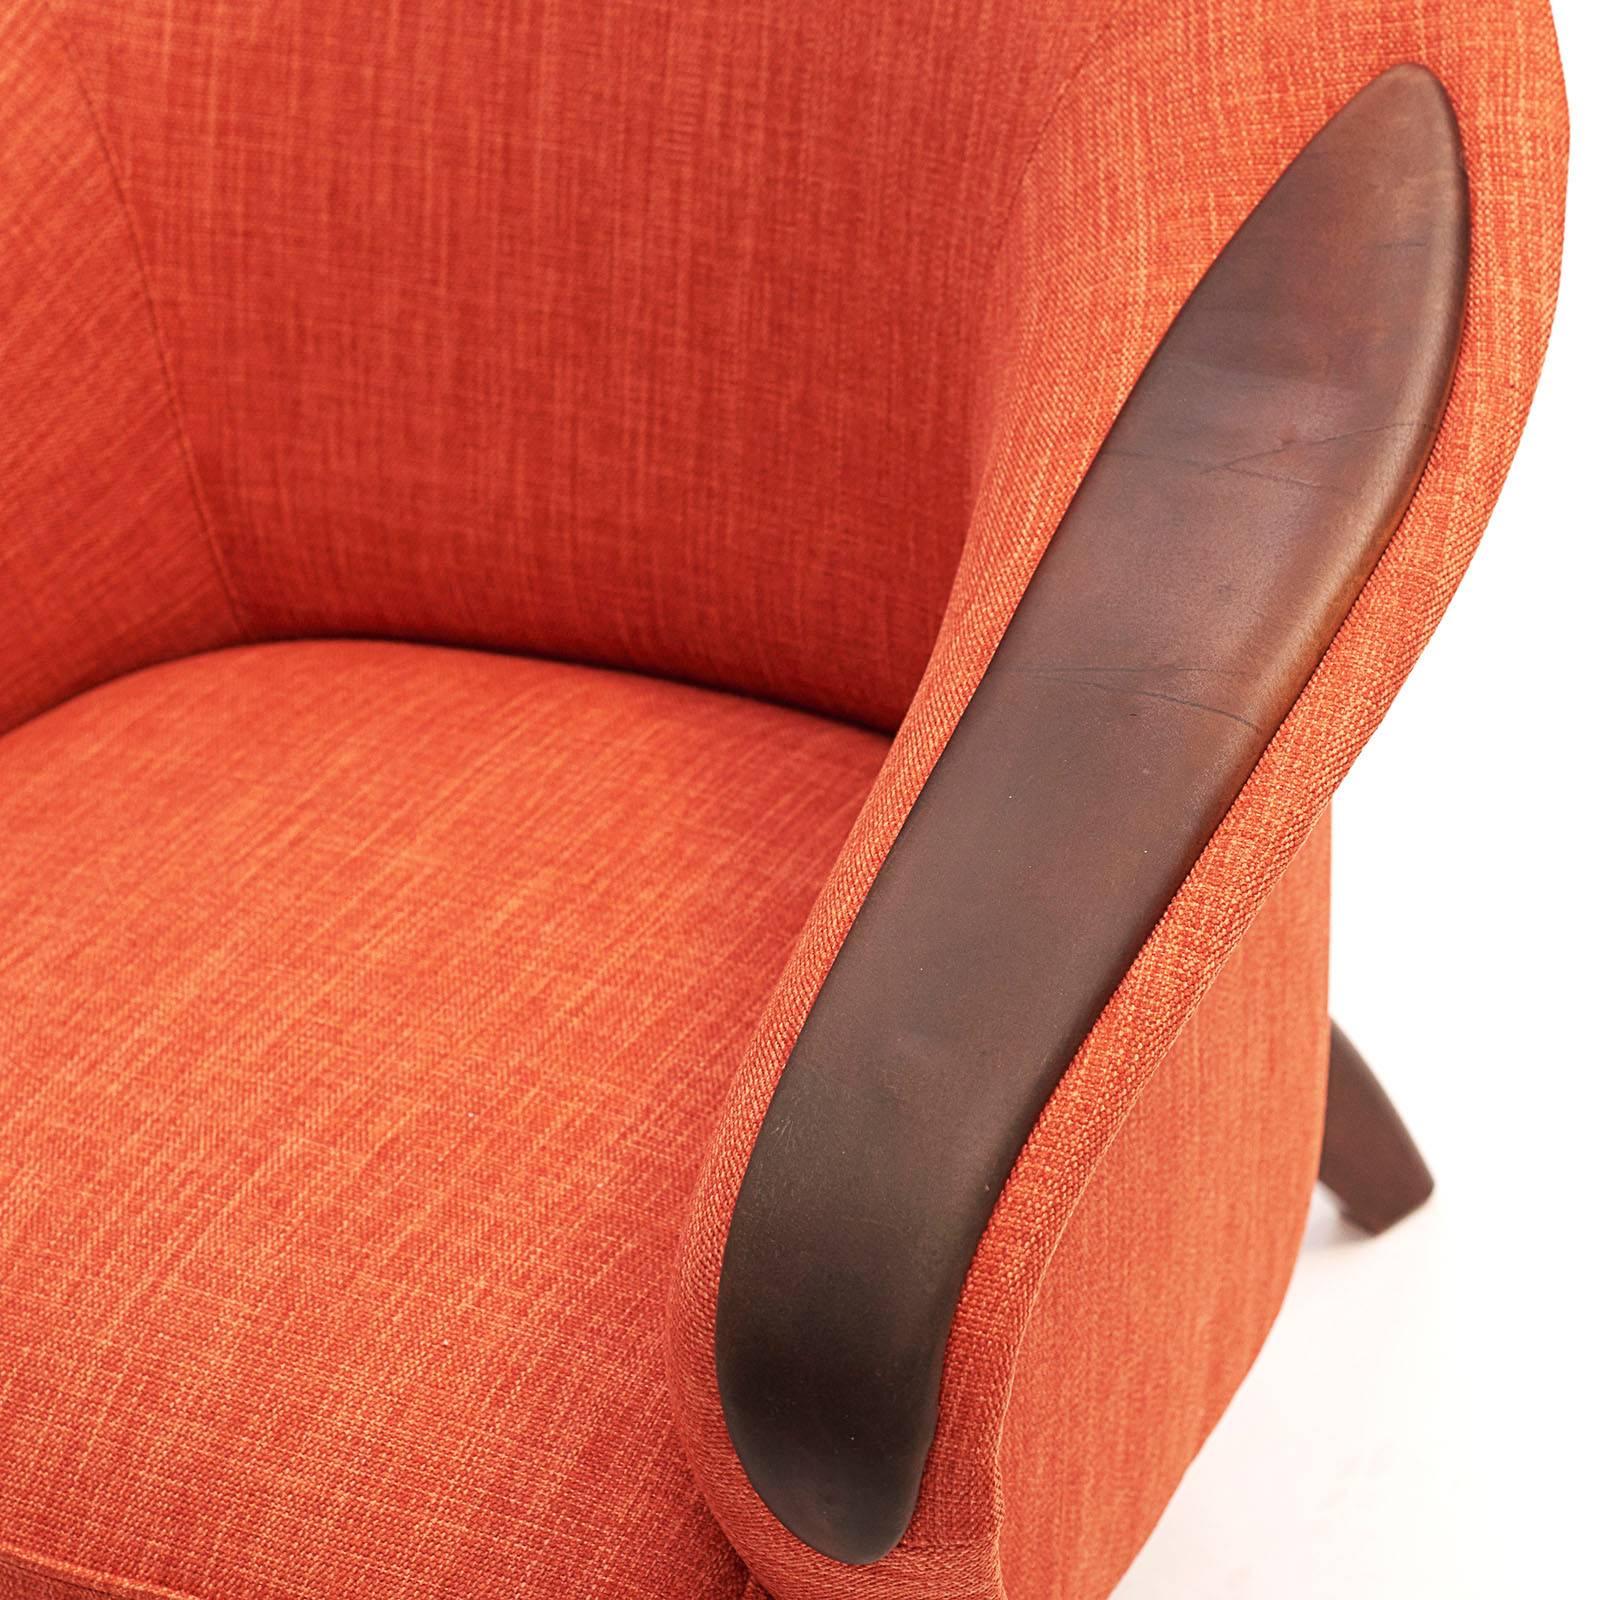 Danish upholstered and leather club chair, circa 1960, with a tub back and partially padded leather armrest.

Original leather with a warm patina and new upholstery from Baker.